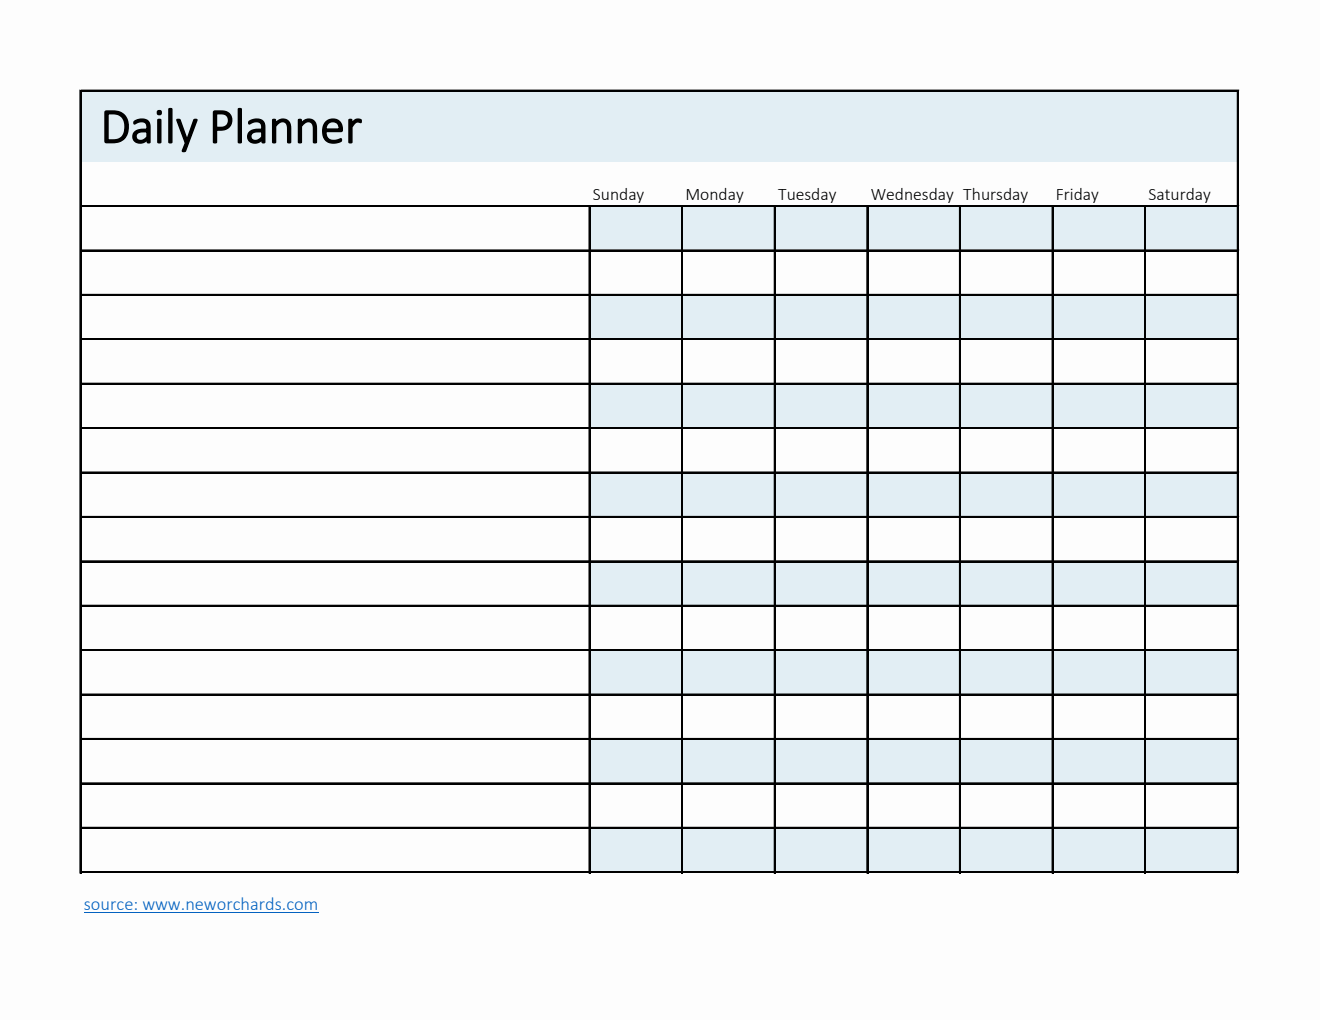 Daily Planner and Checklist Template in Excel (Blue)